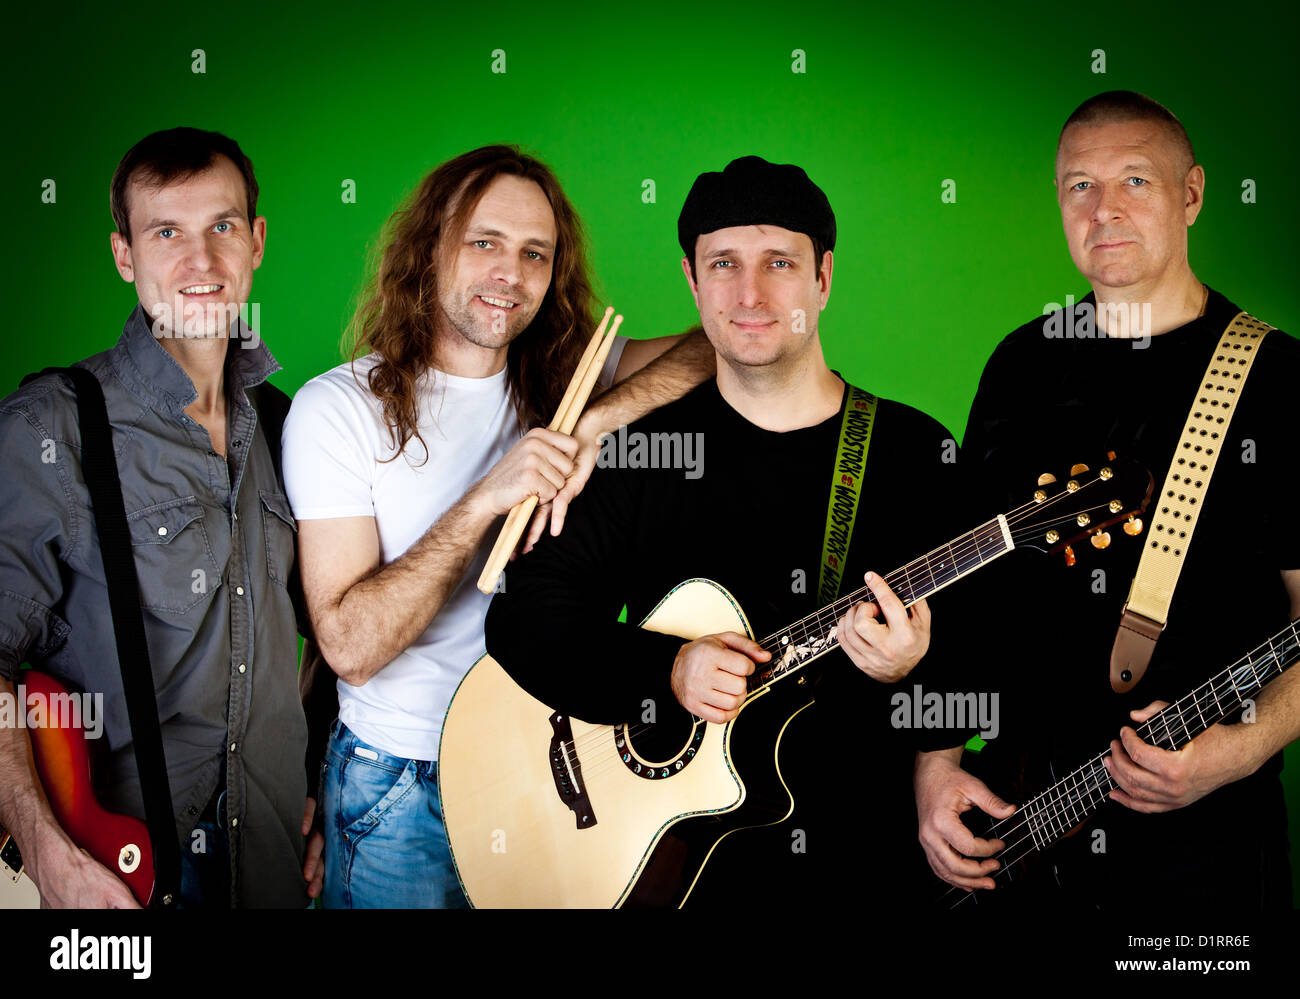 Musical group of artists on a green background Stock Photo